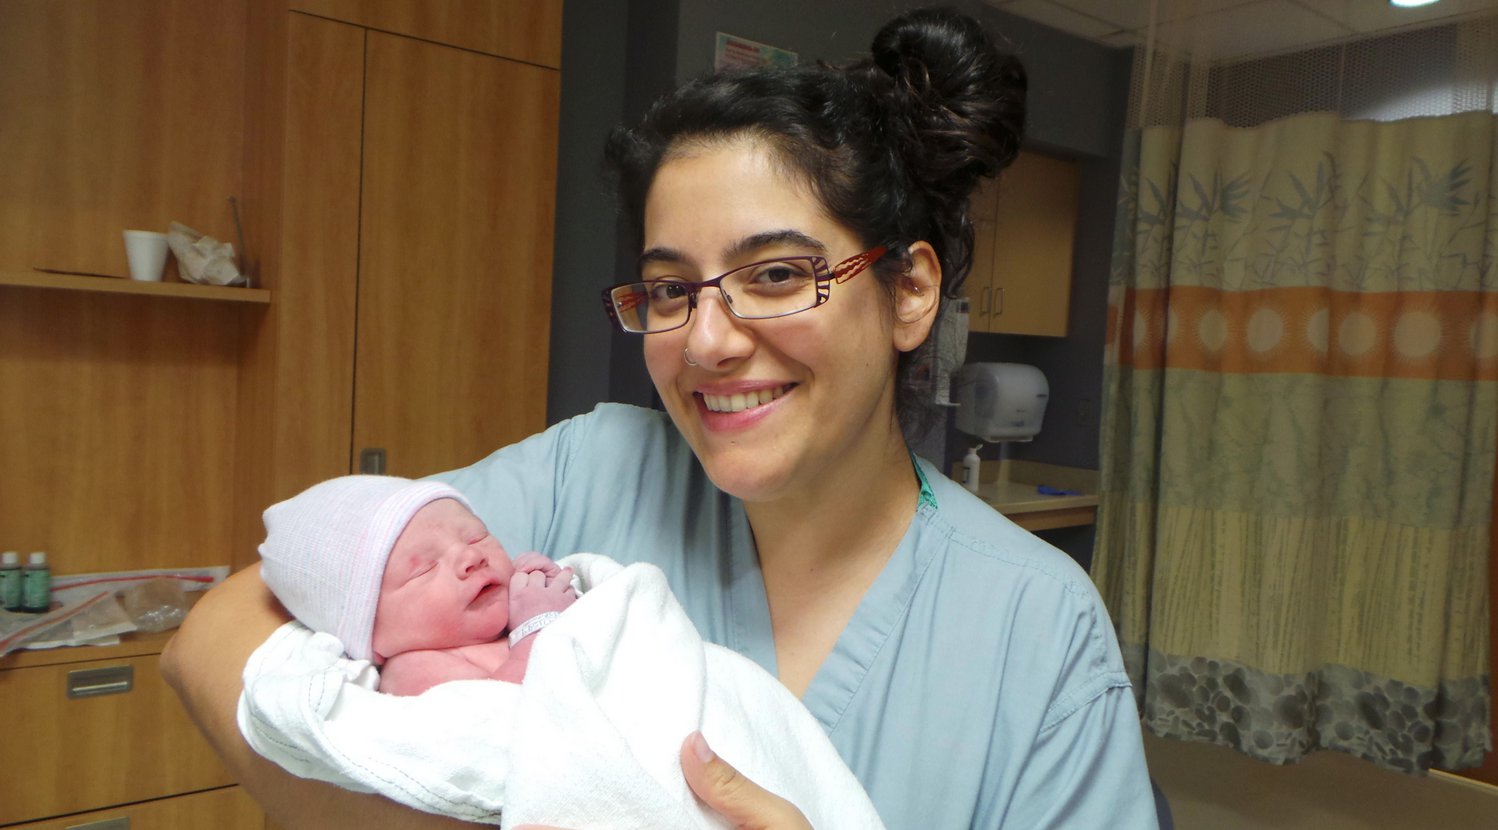 Dr. Ghazal Moayedi (OB/GYN) holding a newborn baby. Her speech was cancelled at Montefiore Medical Center following a pro-Palestine social media post.